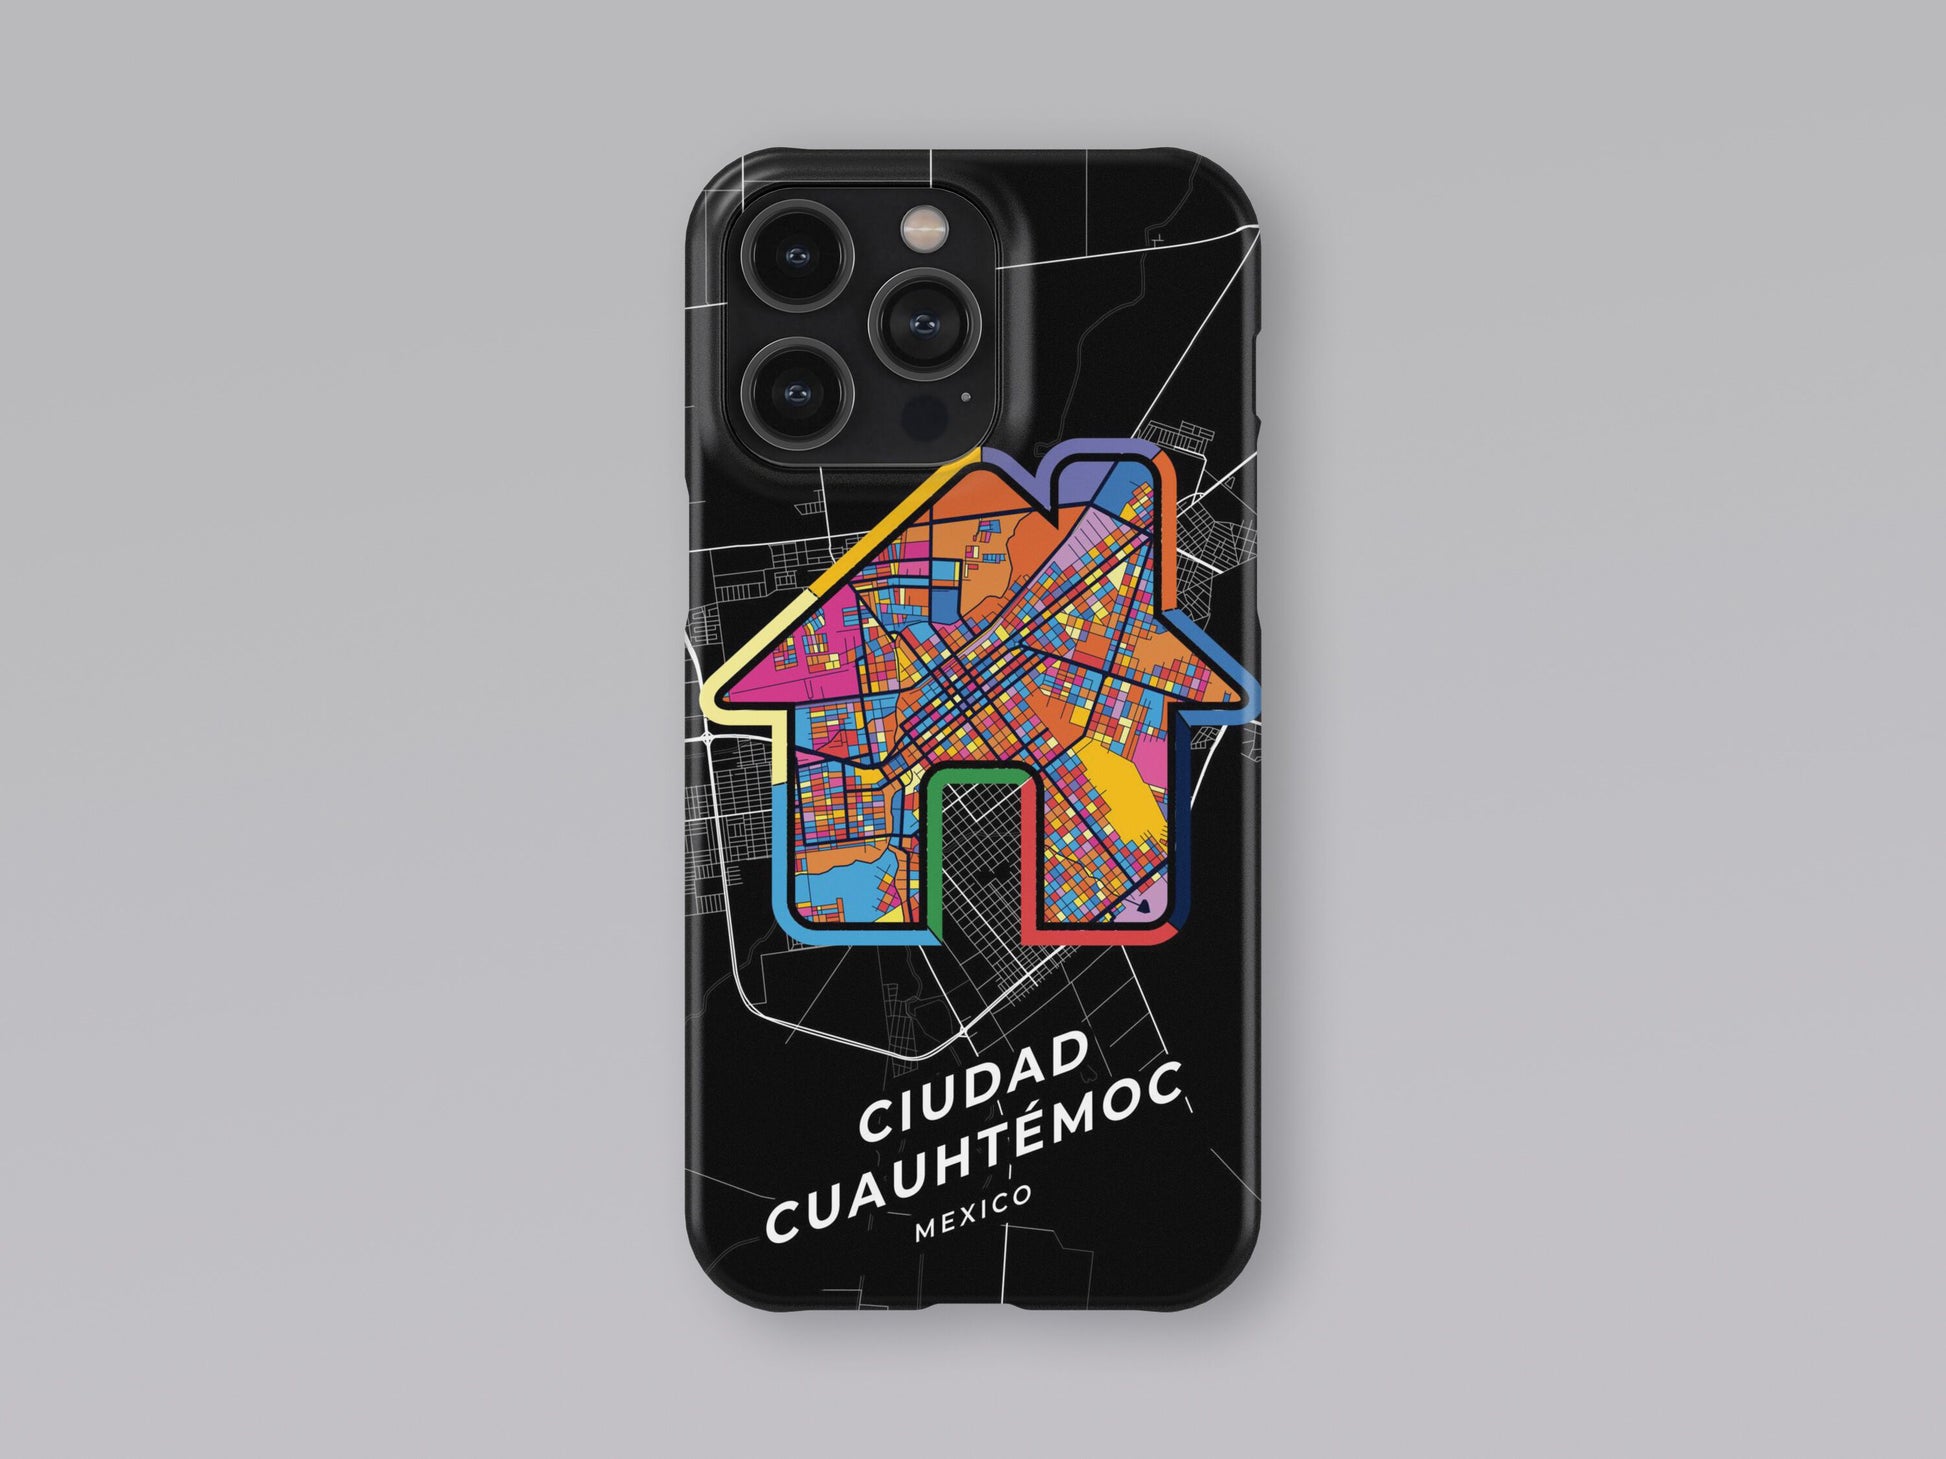 Ciudad Cuauhtémoc Mexico slim phone case with colorful icon. Birthday, wedding or housewarming gift. Couple match cases. 3